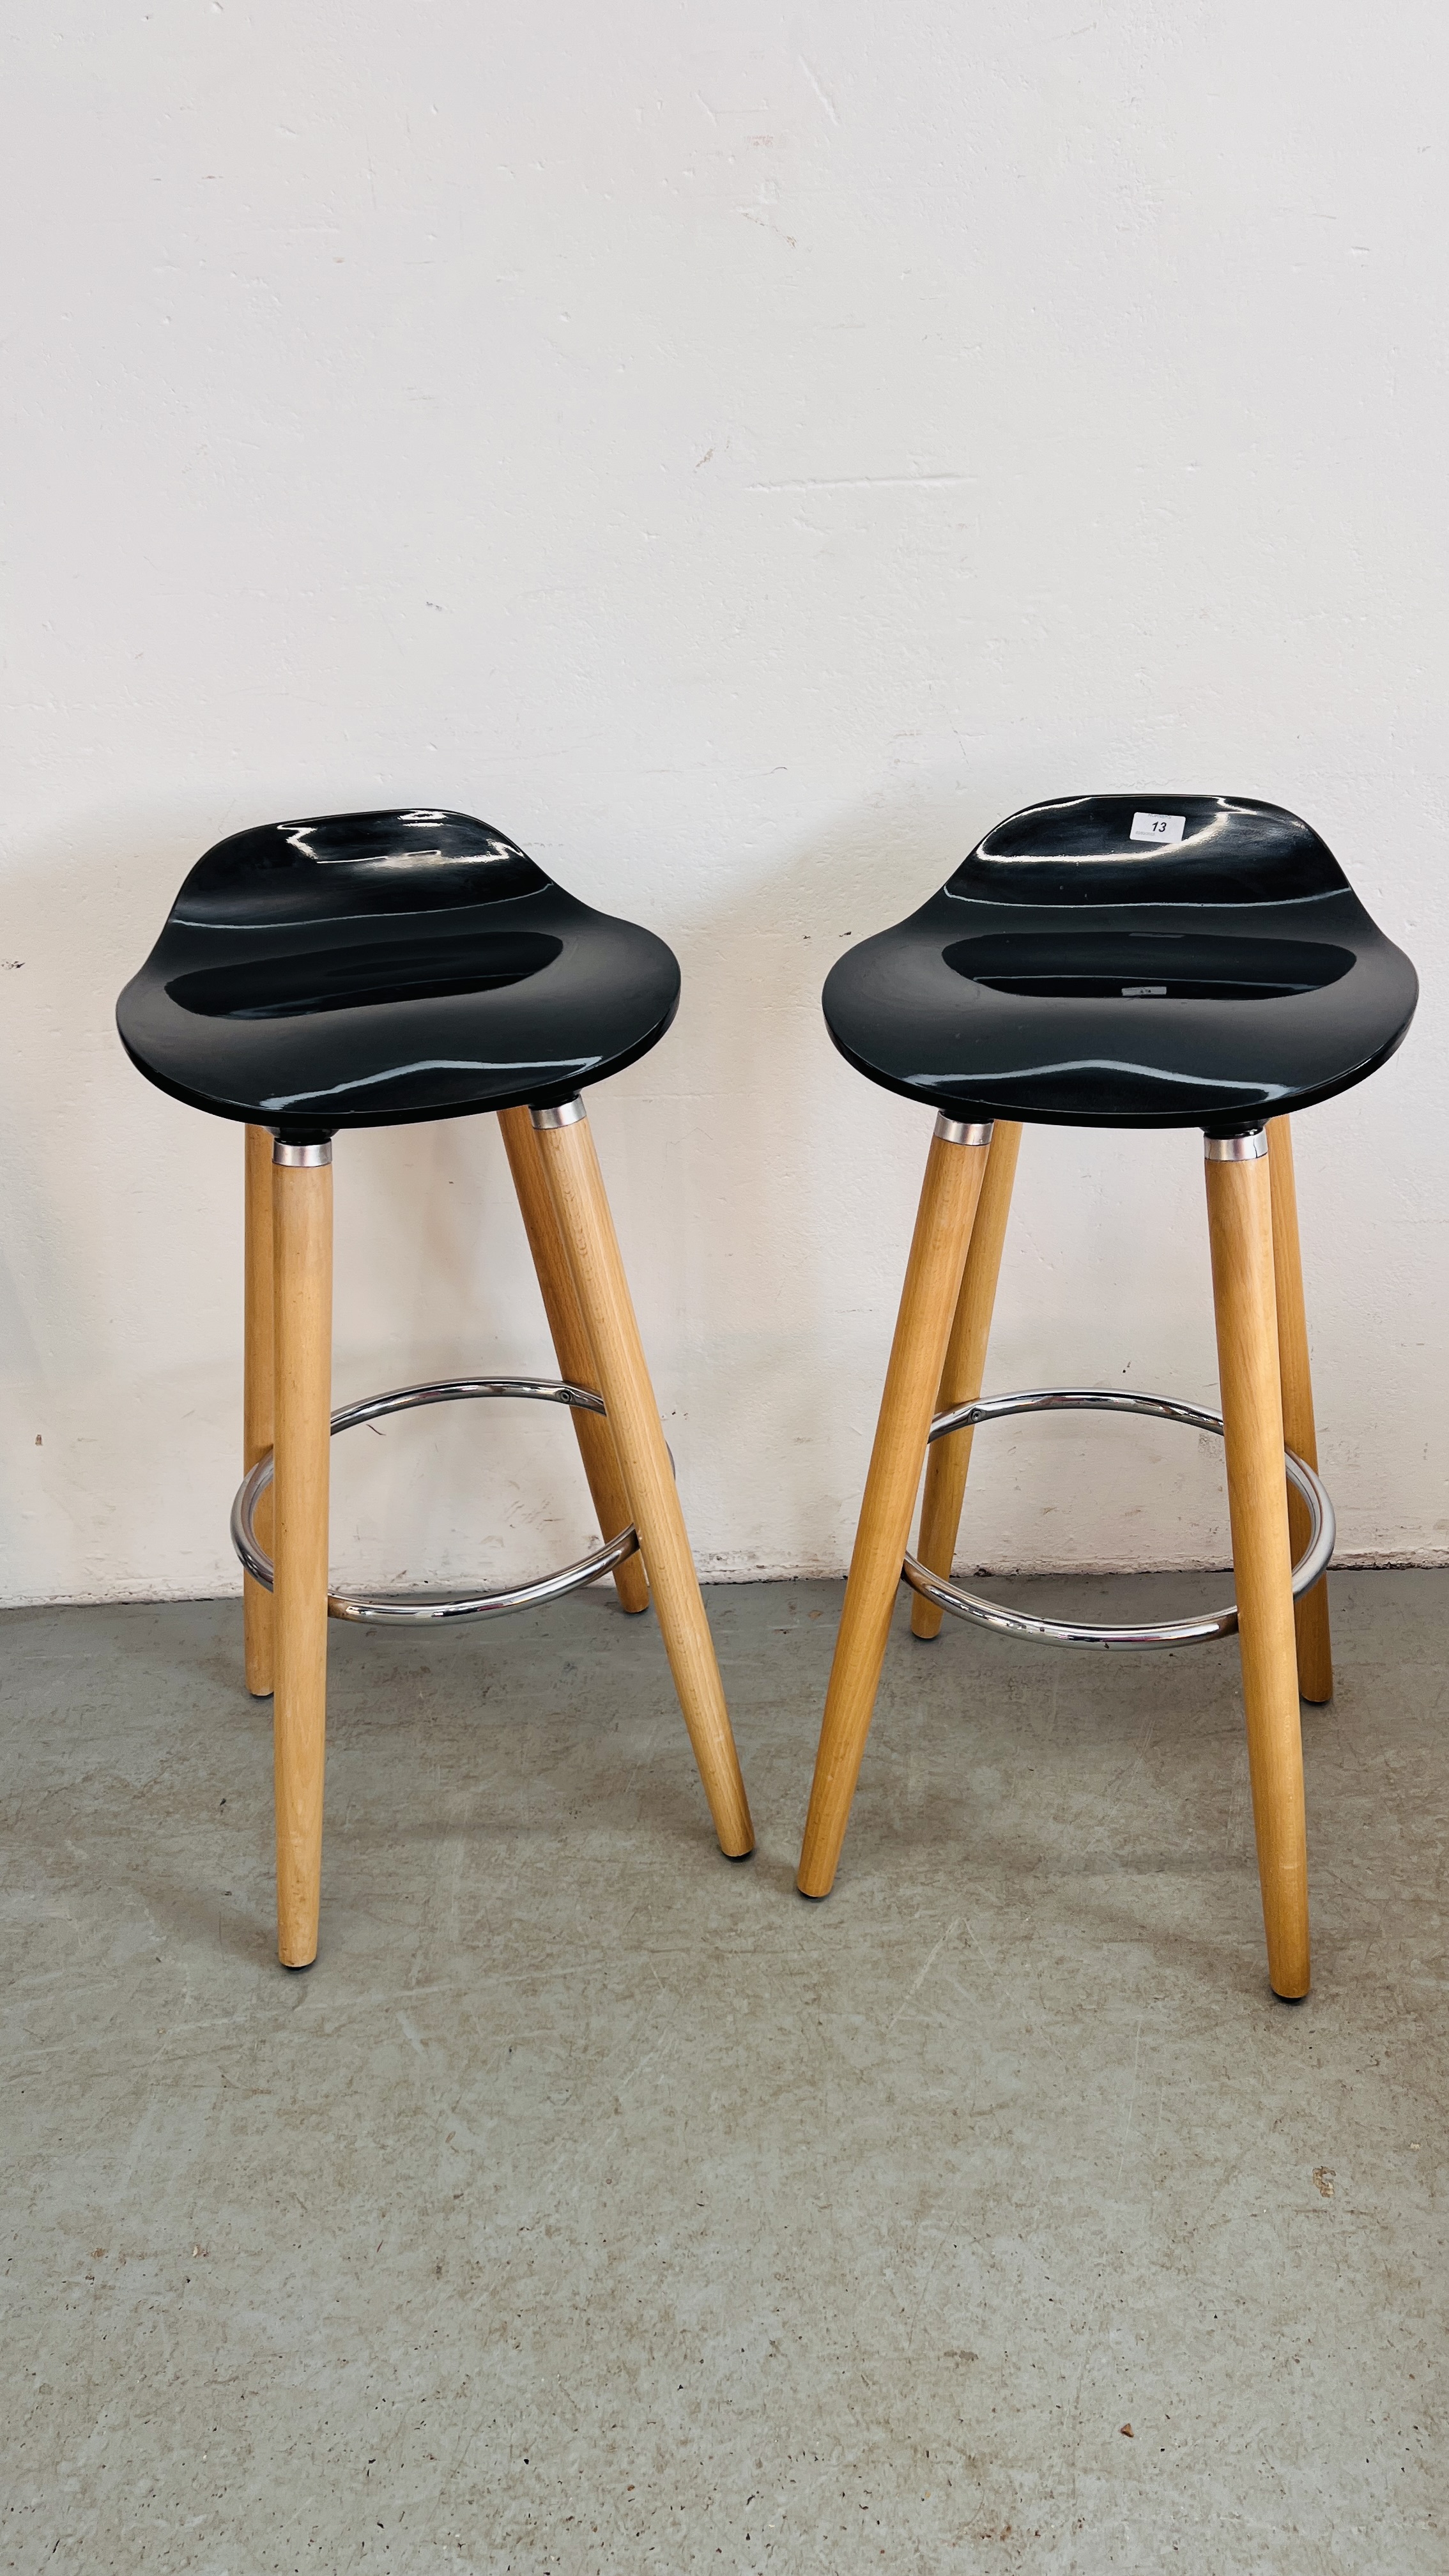 A PAIR OF PINE AND BLACK BREAKFAST BAR STOOLS.